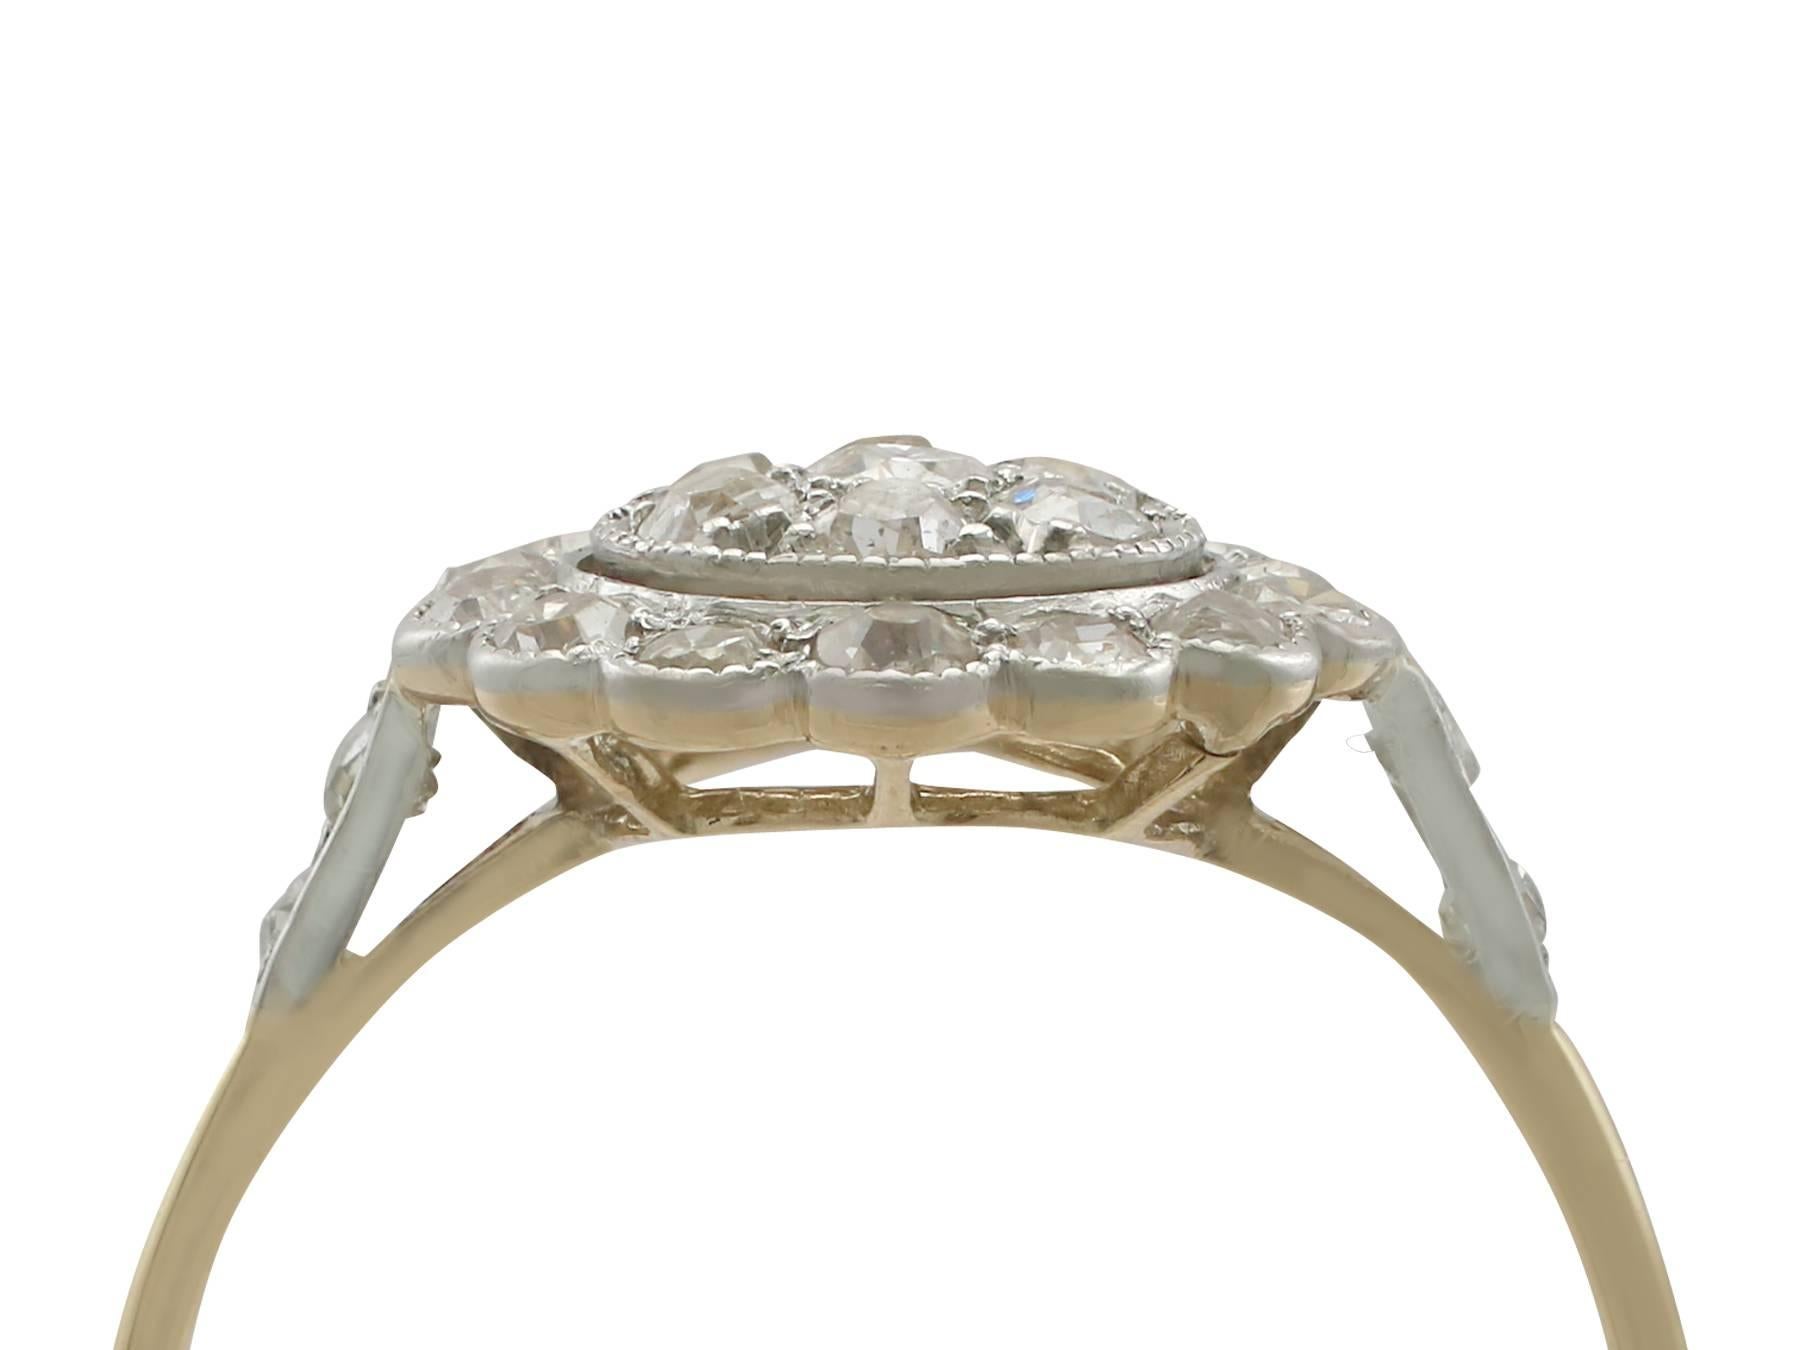 A fine and impressive antique 0.78 carat diamond and 18 karat yellow gold, platinum set cluster style ring; part of our diverse antique jewelry collections

This fine and impressive diamond ring has been crafted in 18k yellow gold with a platinum